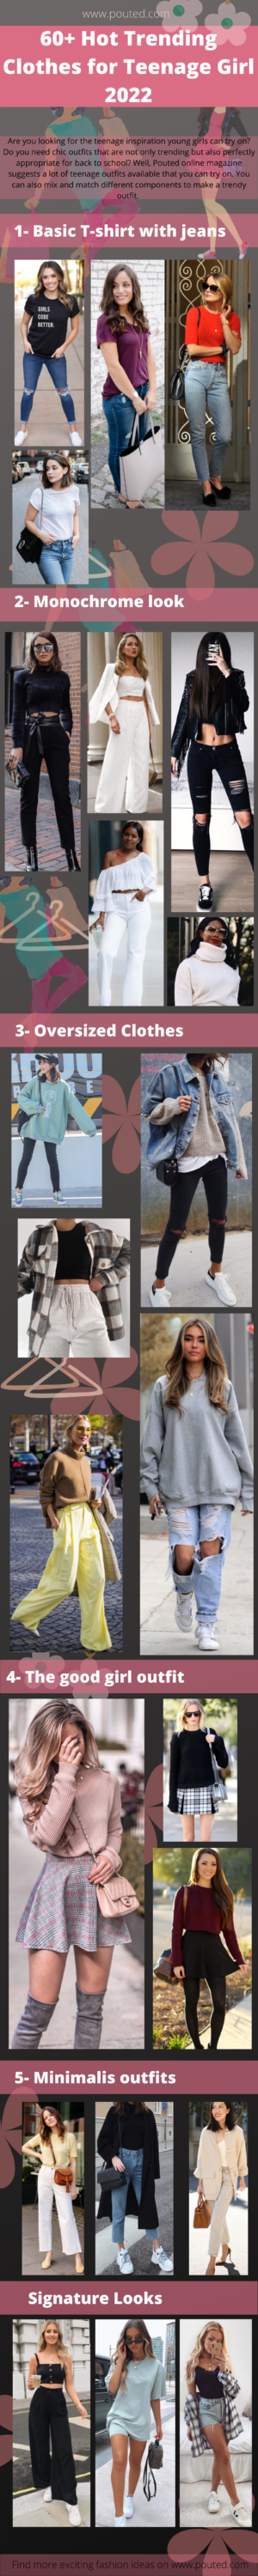 hot-trending-clothes-for-teenage-girls-infographic-300x3000 60+ Hot Trending Clothes for Teenage Girl 2022